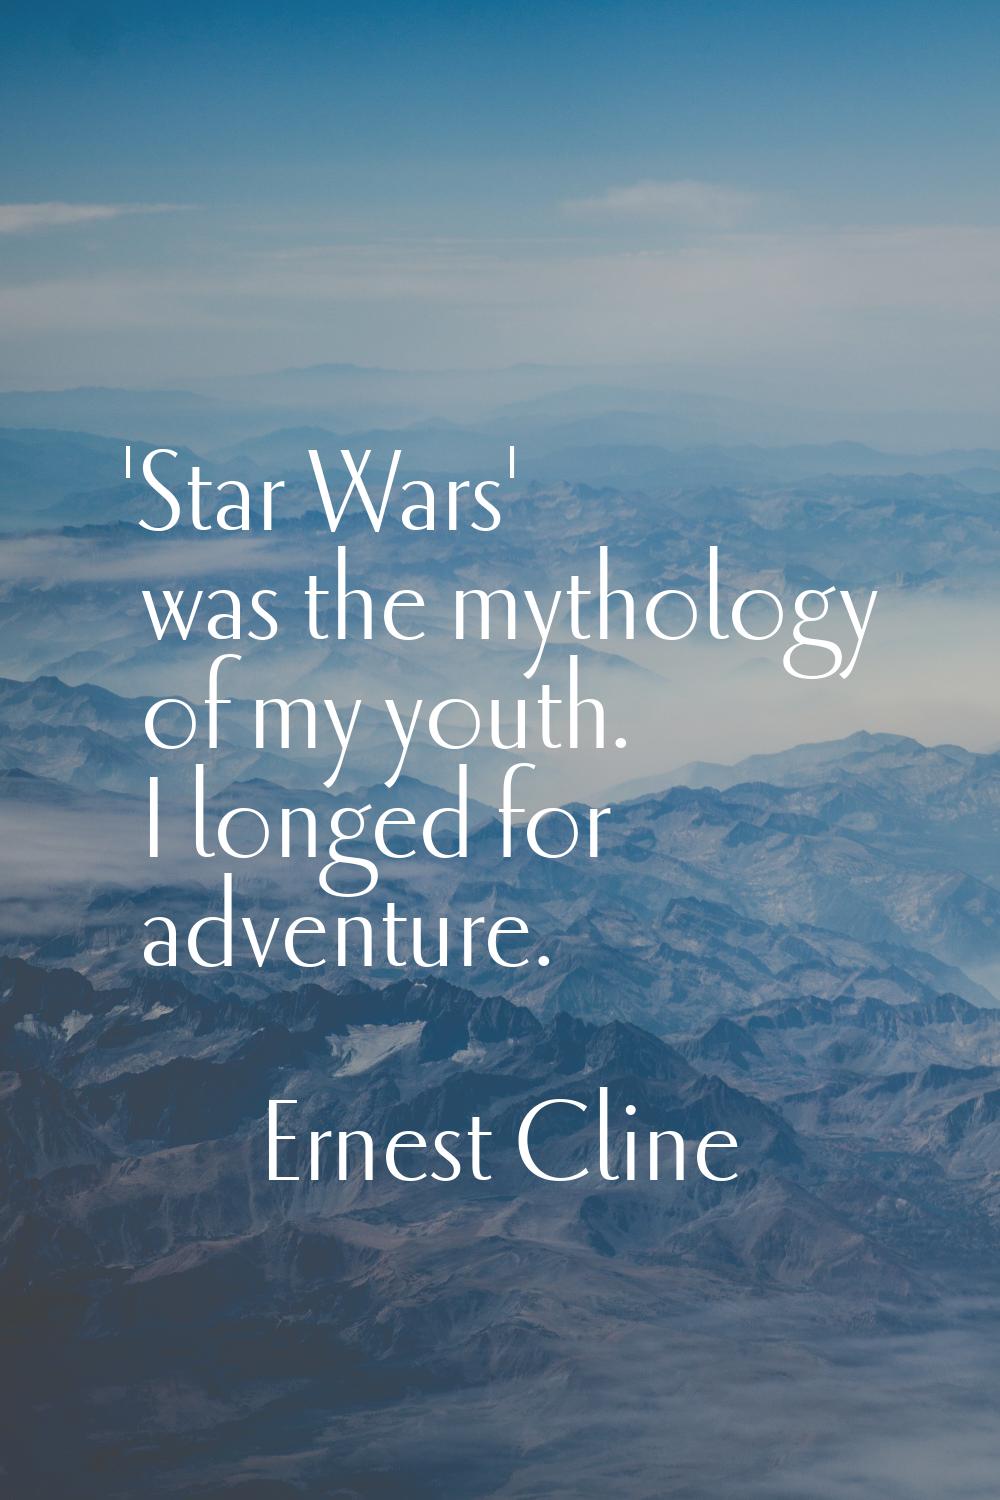 'Star Wars' was the mythology of my youth. I longed for adventure.